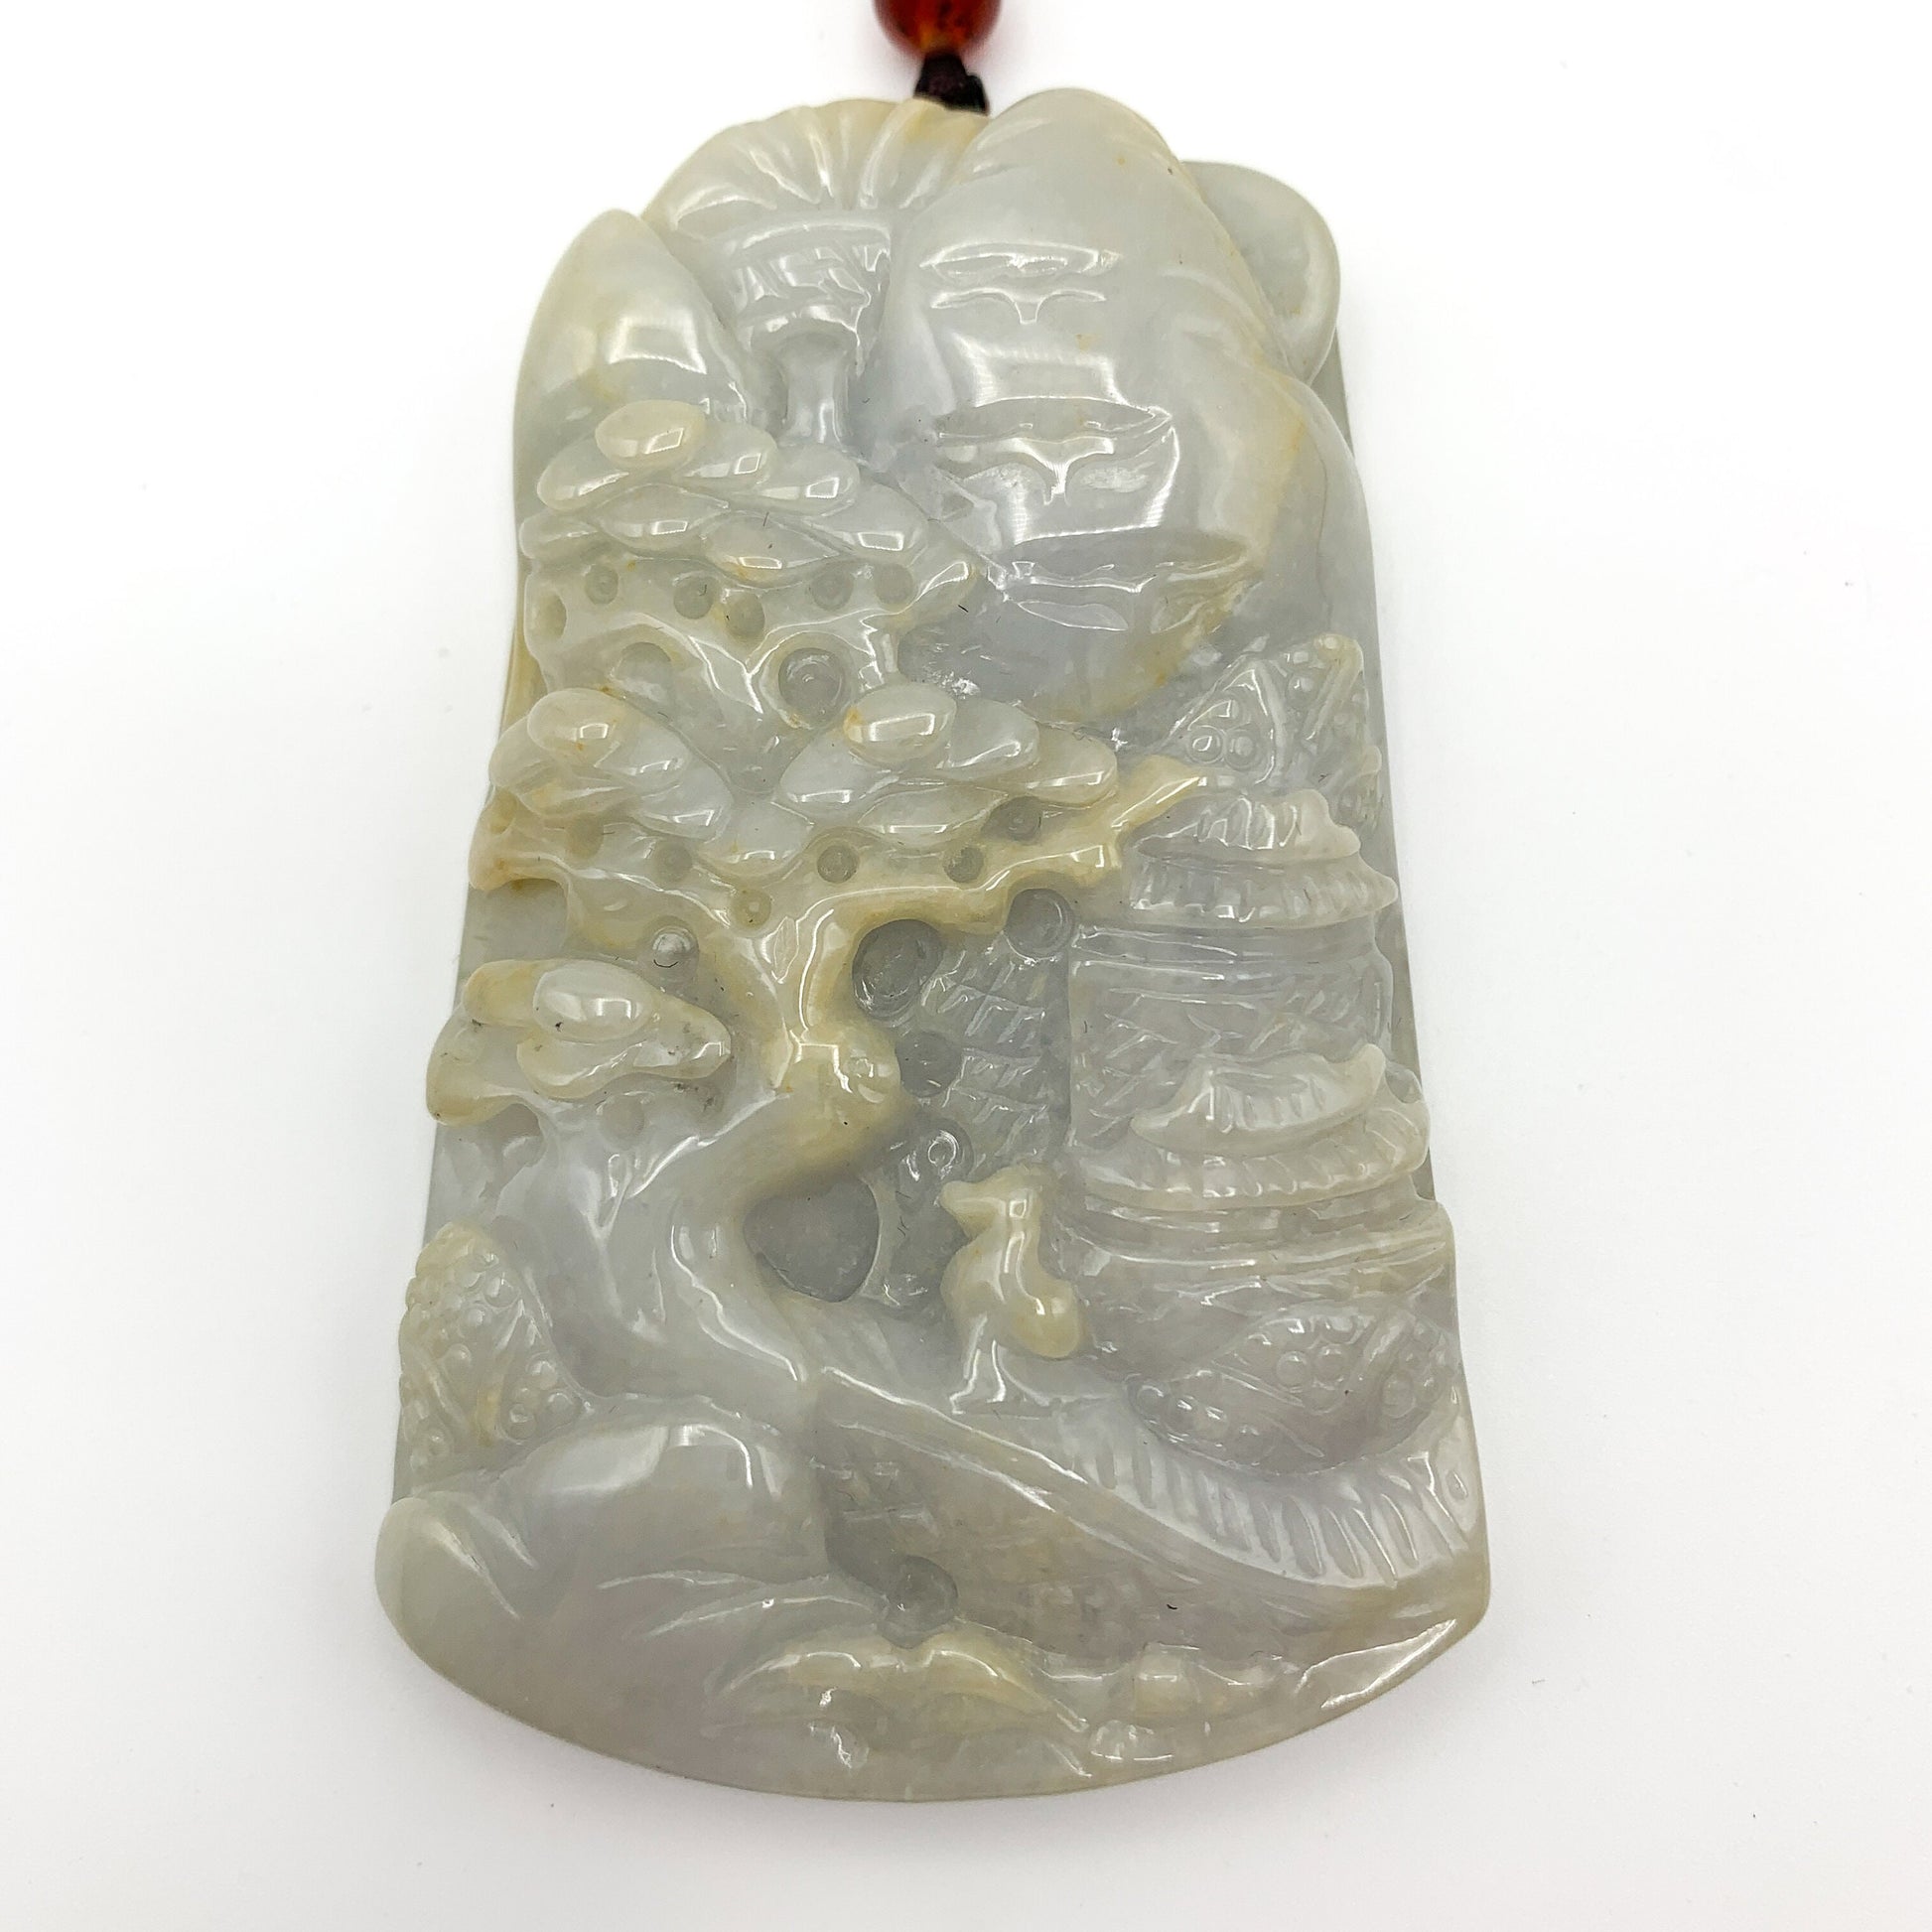 Jade Tree Pendant, Jadeite Jade, Mountain Forest River Scenery, Hand Carved Pendant Necklace, YJ-0321-0359711 - AriaDesignCollection